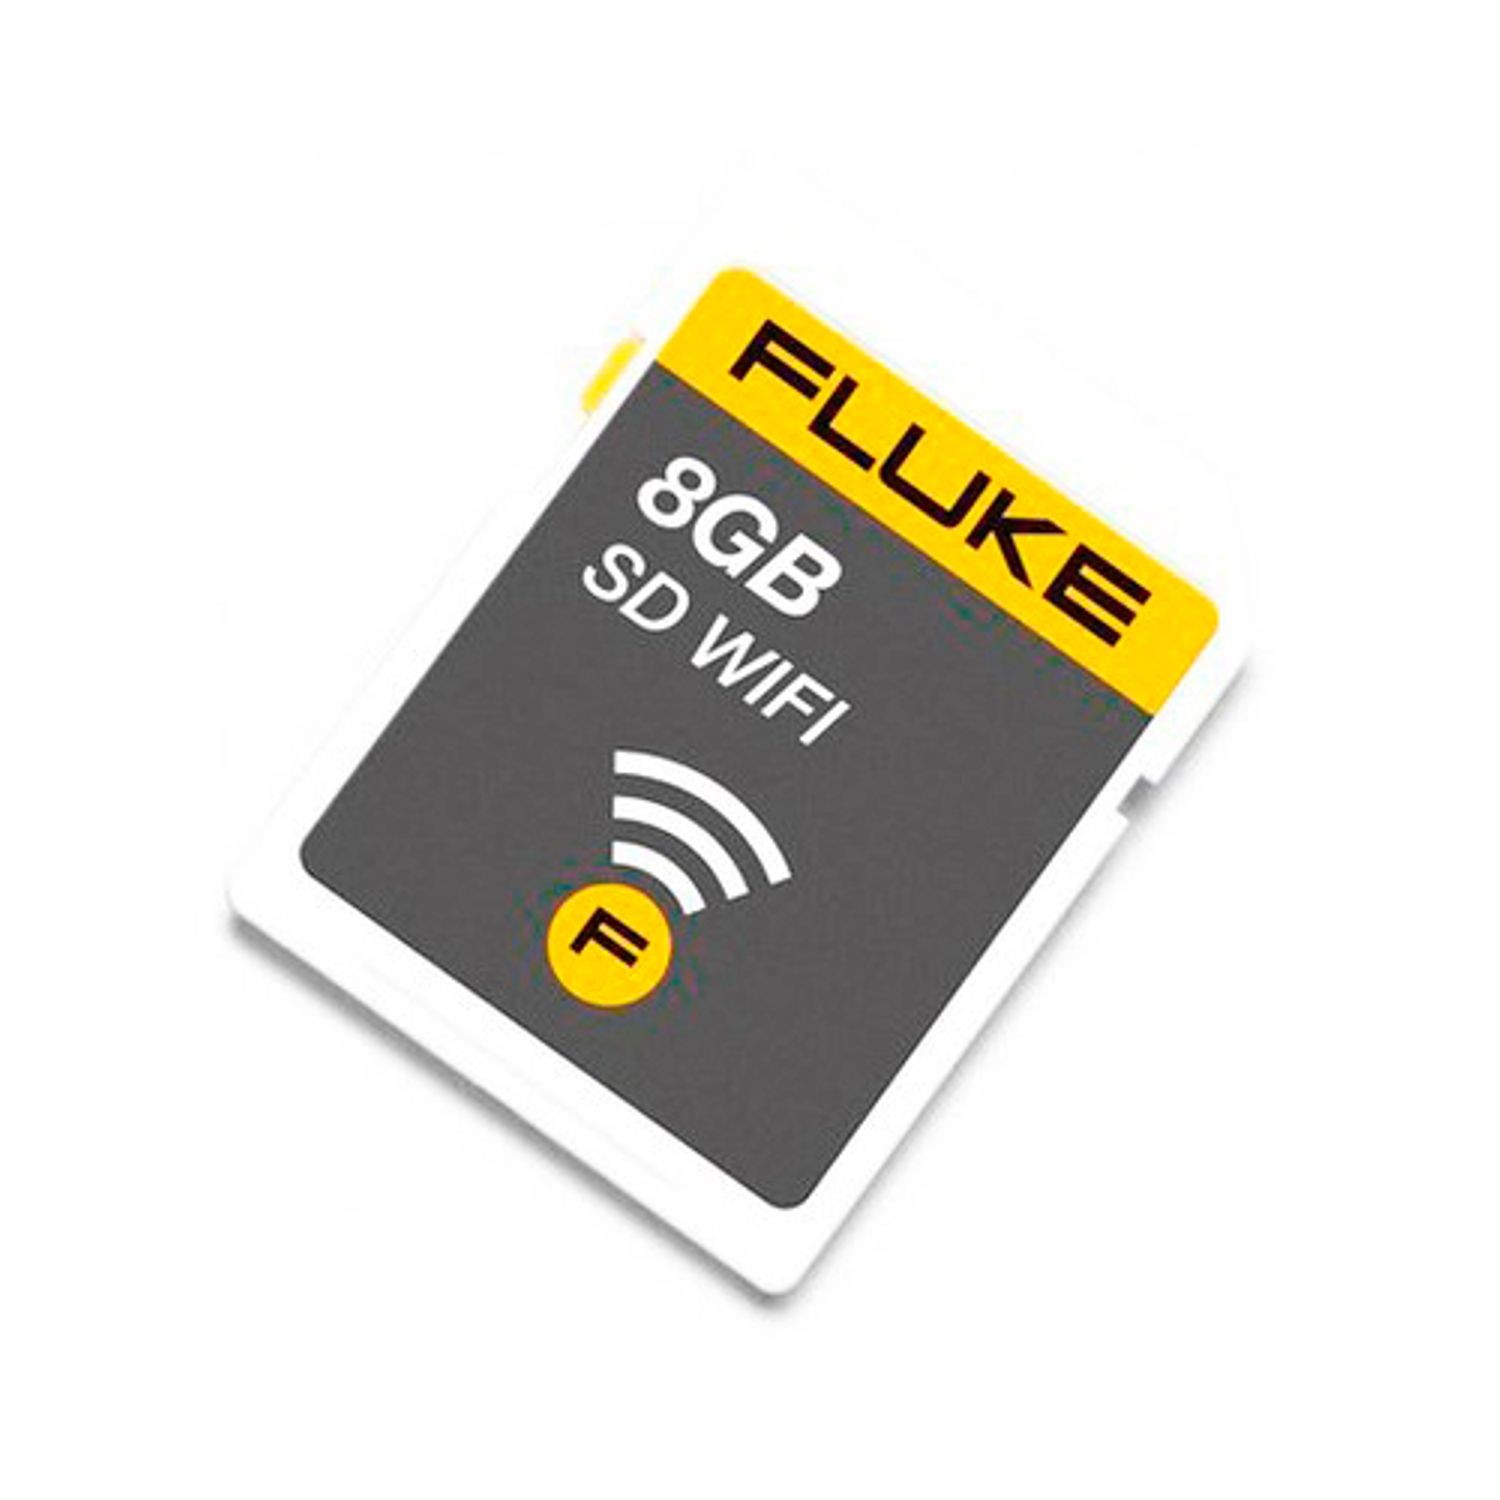 Connect® Wireless SD Card